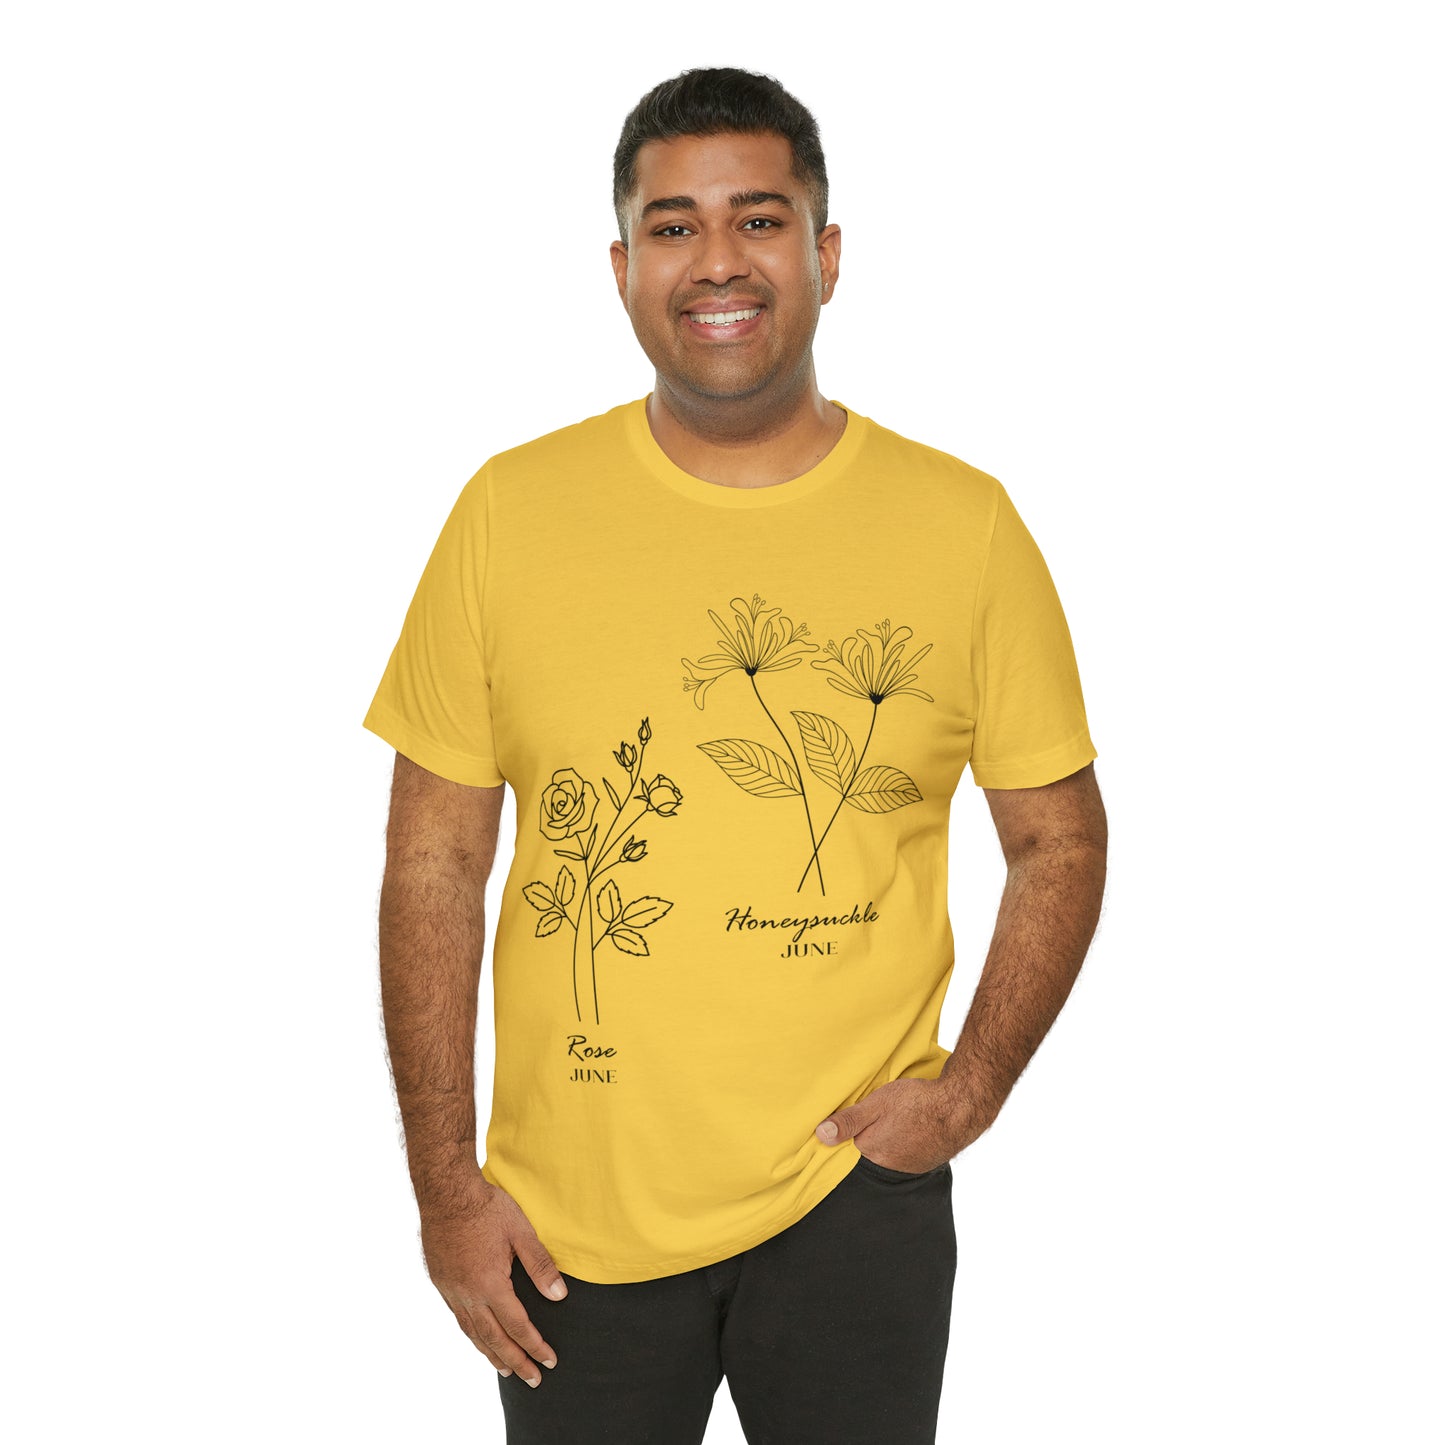 Flowers and Moths Style, June, Unisex Jersey Short Sleeve Tee